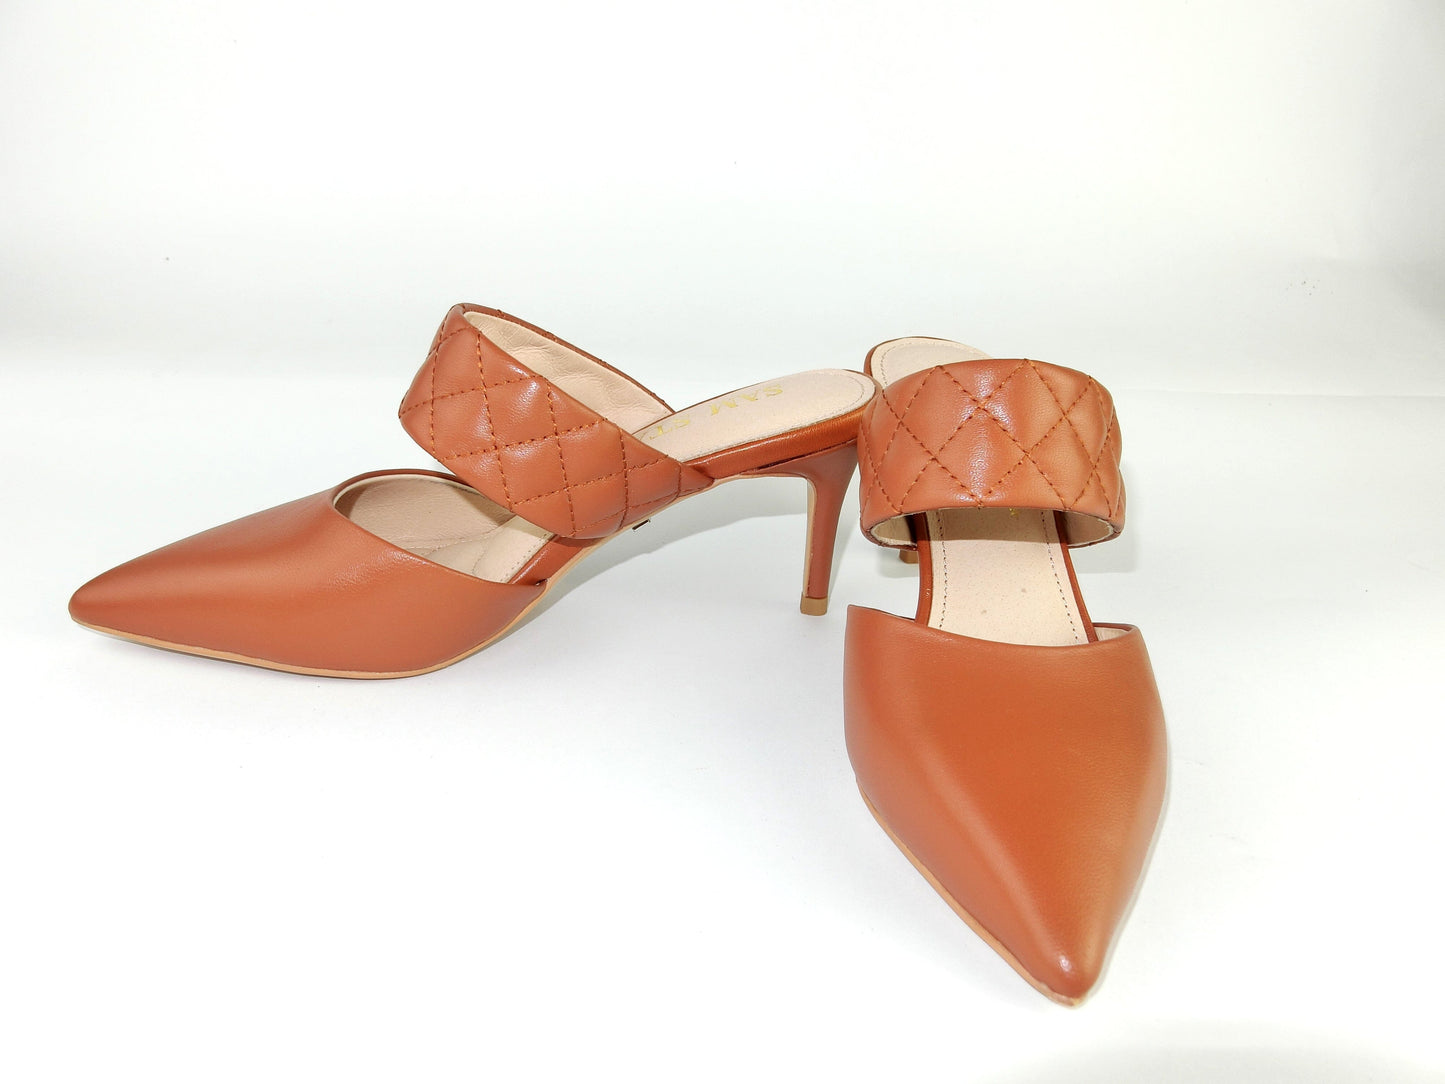 SS22015 Genuine leather court shoes in quilted detail in Tan ladies shoes Sam Star Shoes Tan 39/6 